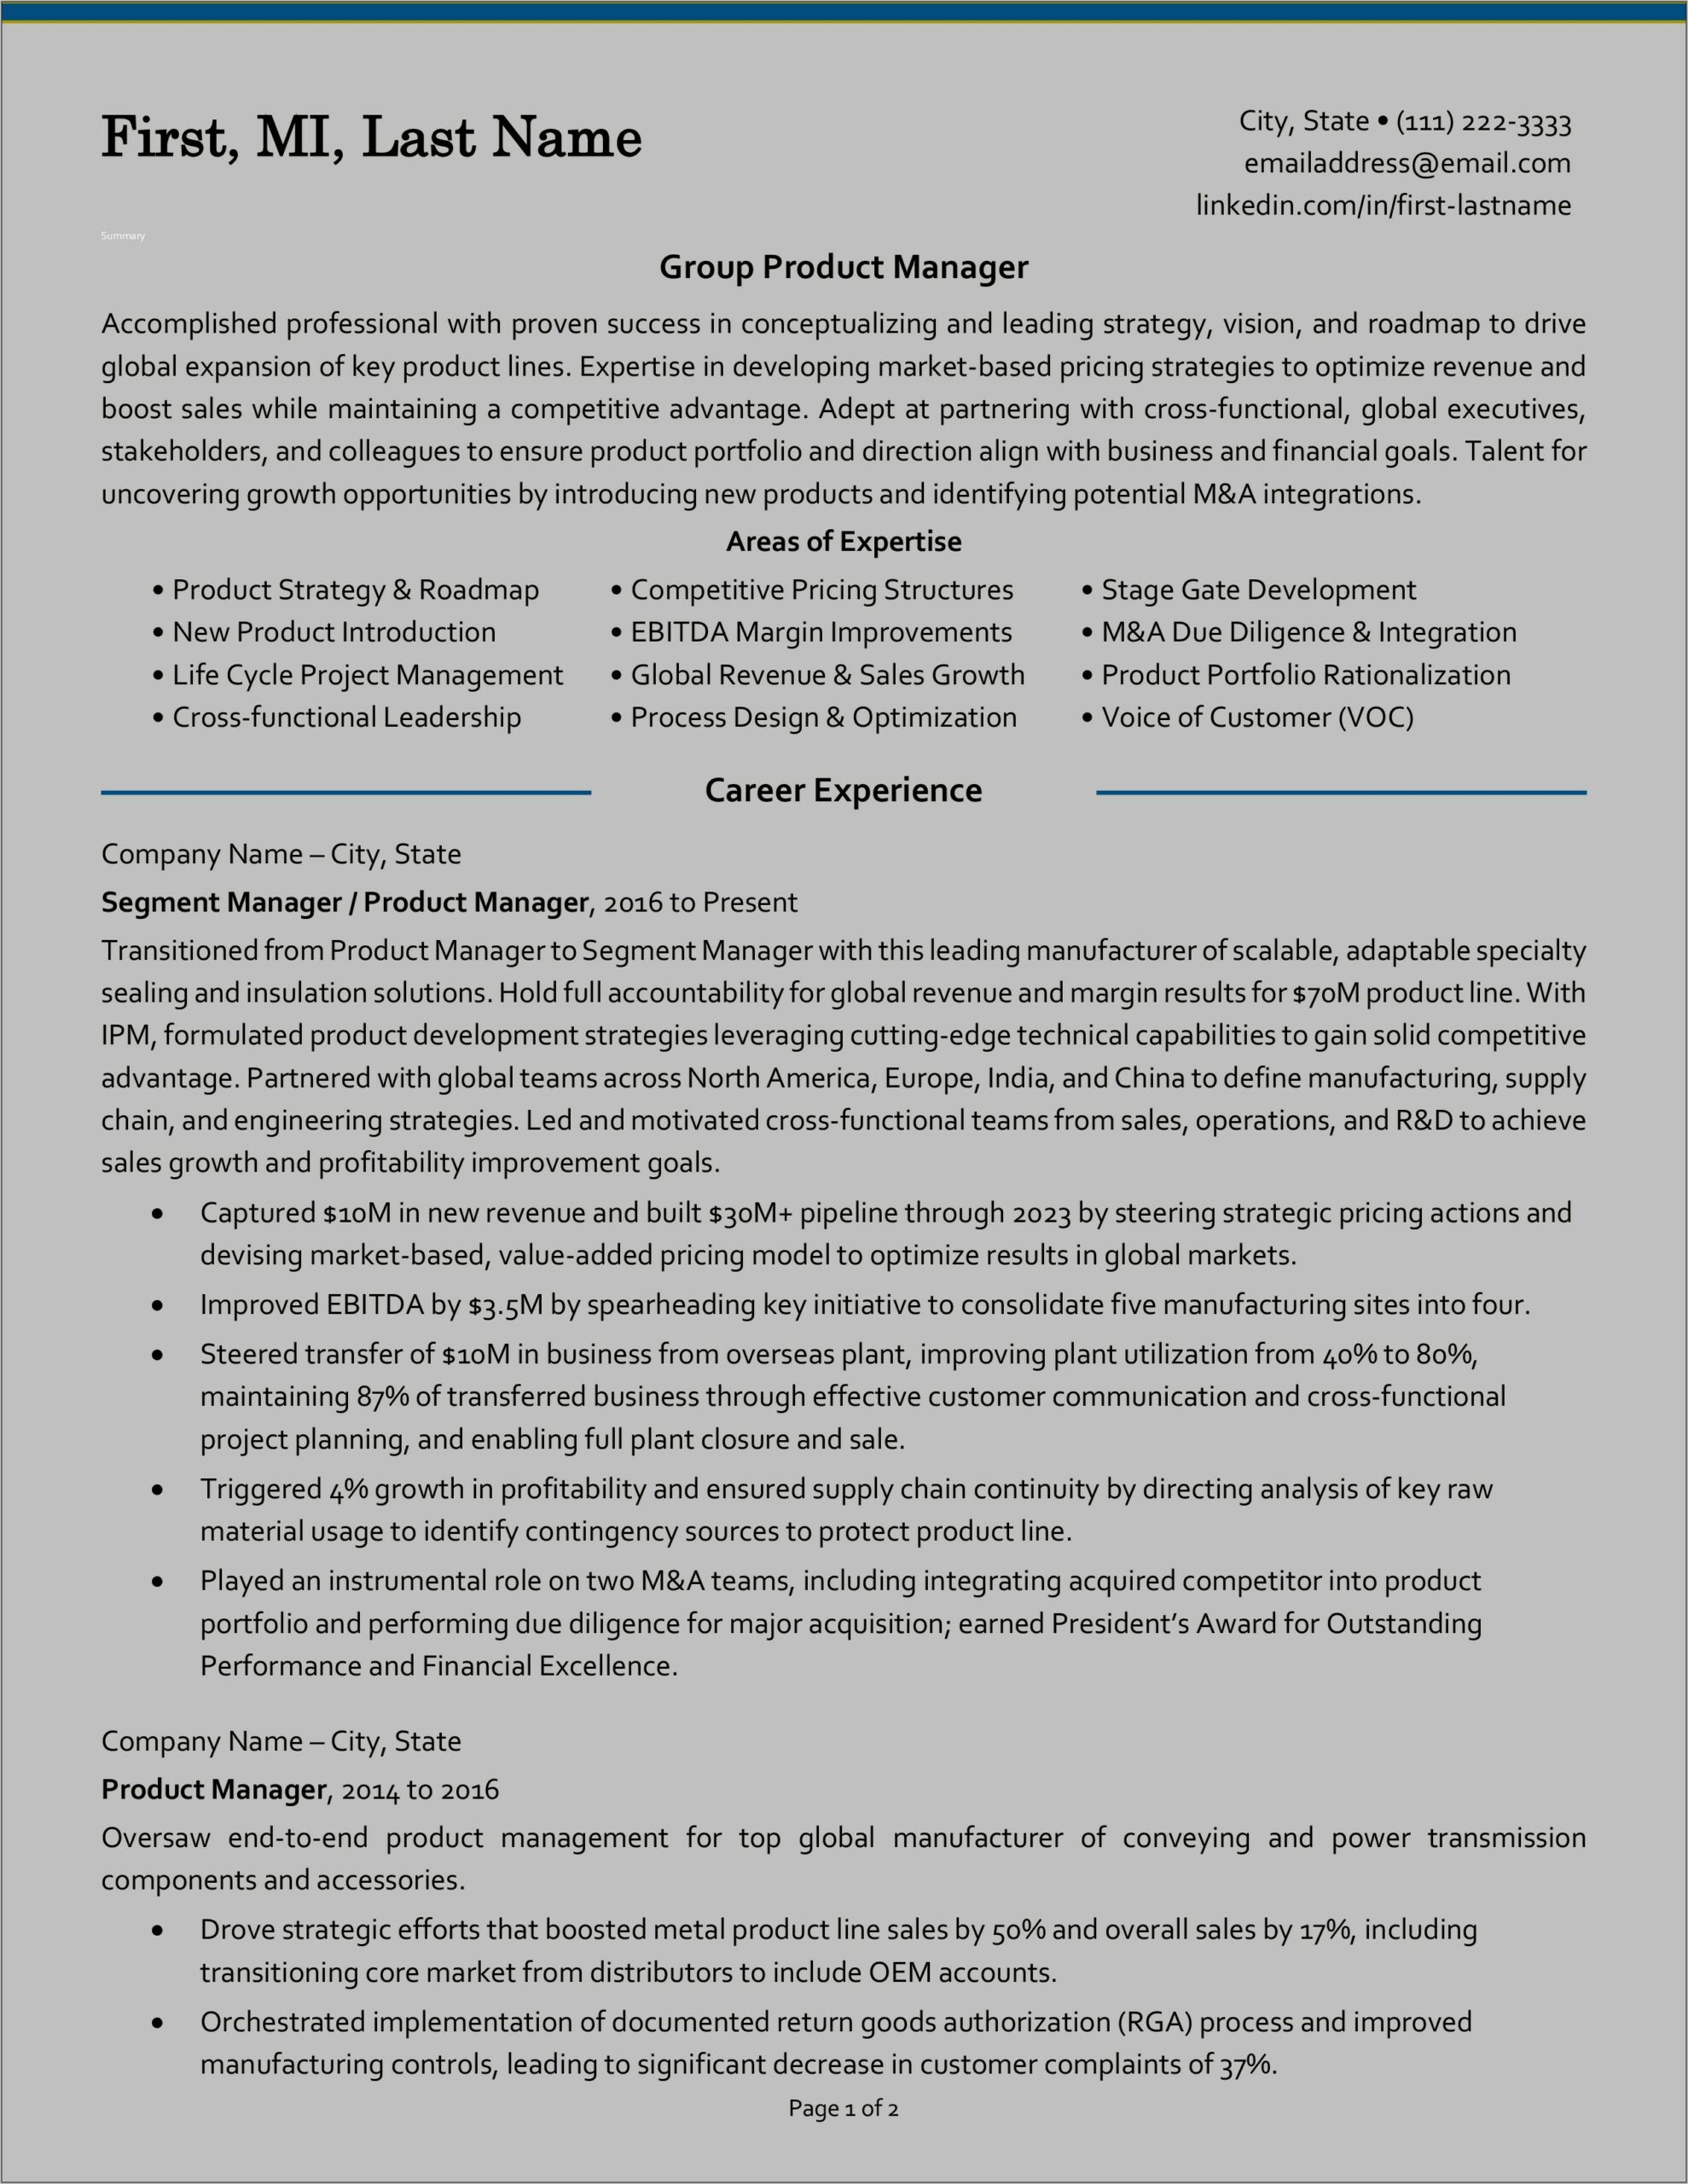 Sample Resume Format For Experienced Candidates